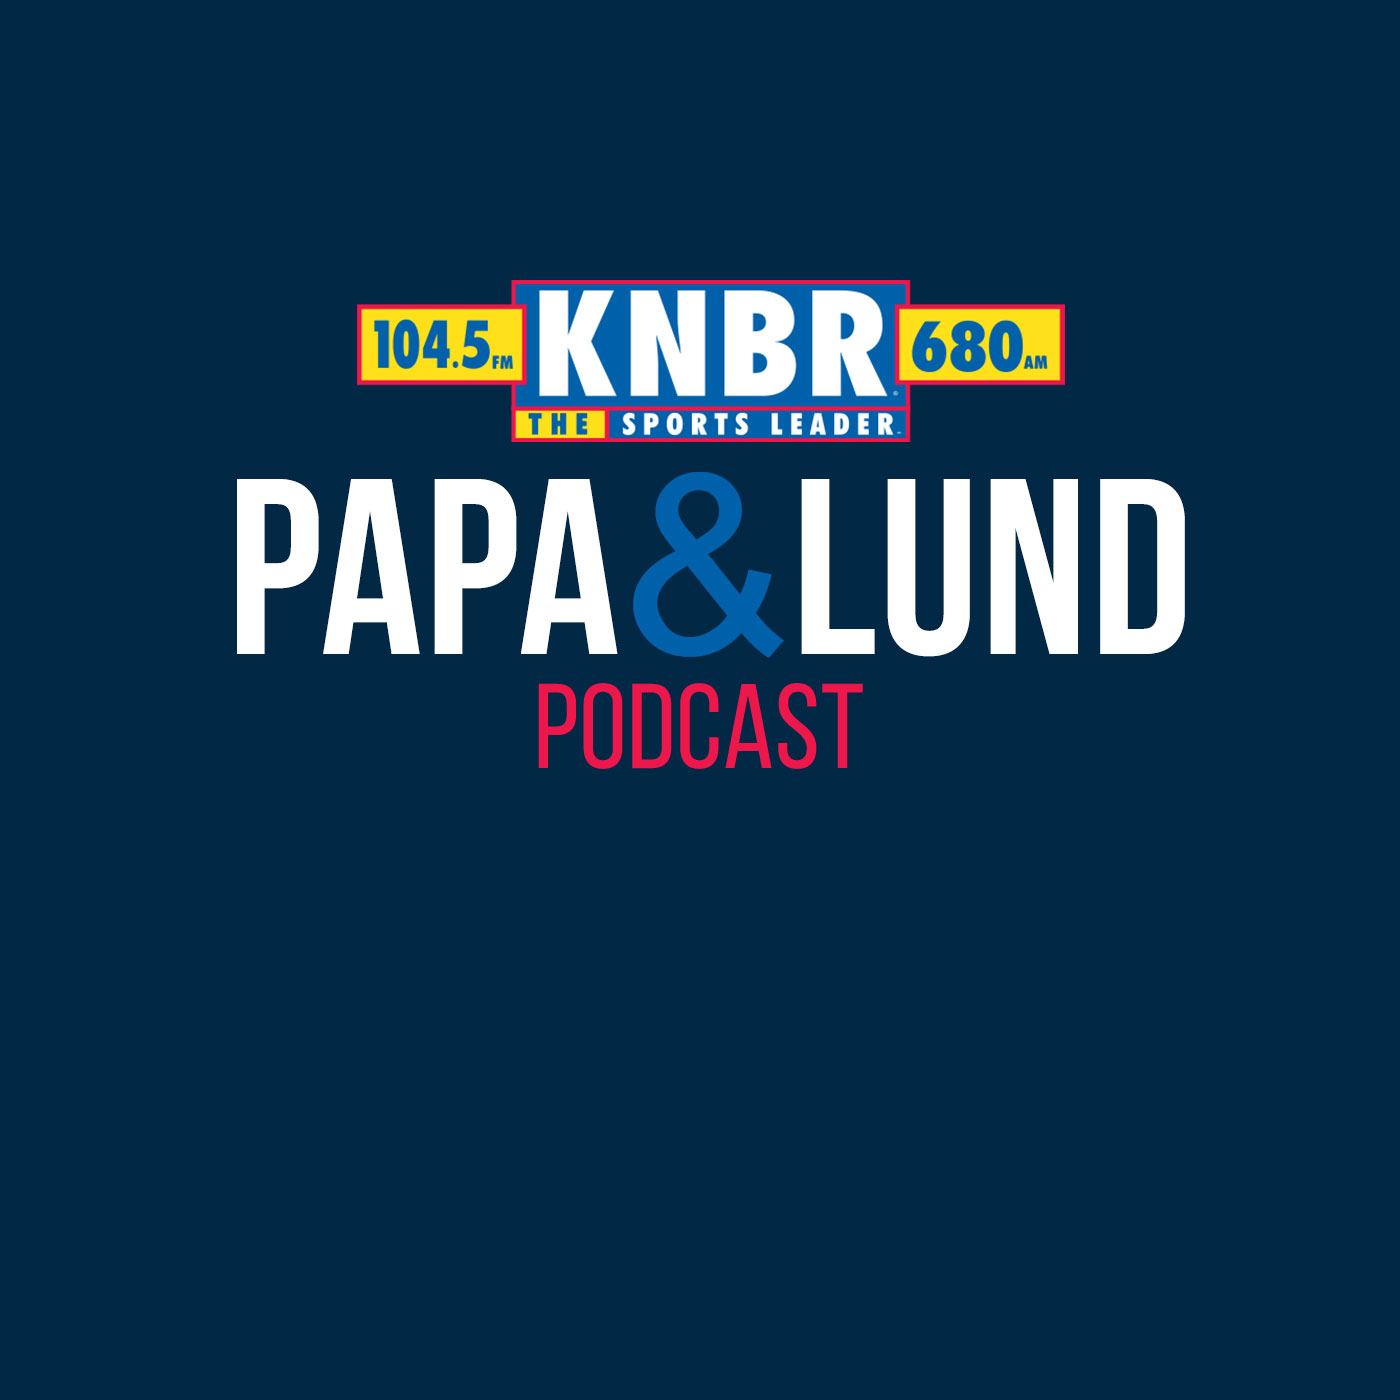 10-20 Cynthia Freelund joins Papa & Lund to discuss the use of analytics in NFL circles